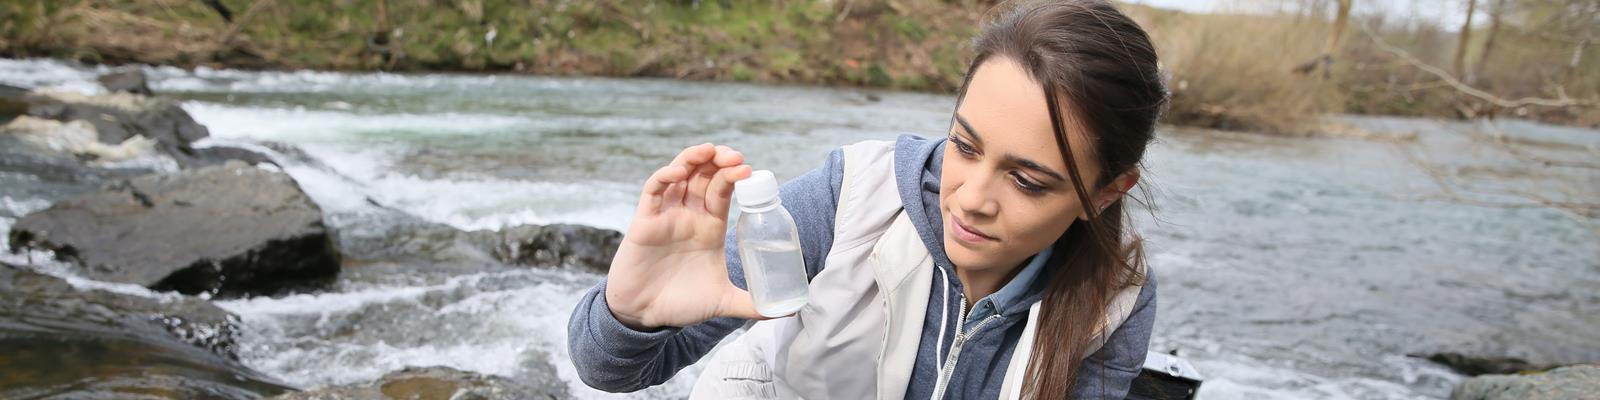 Scientist taking water sample from river